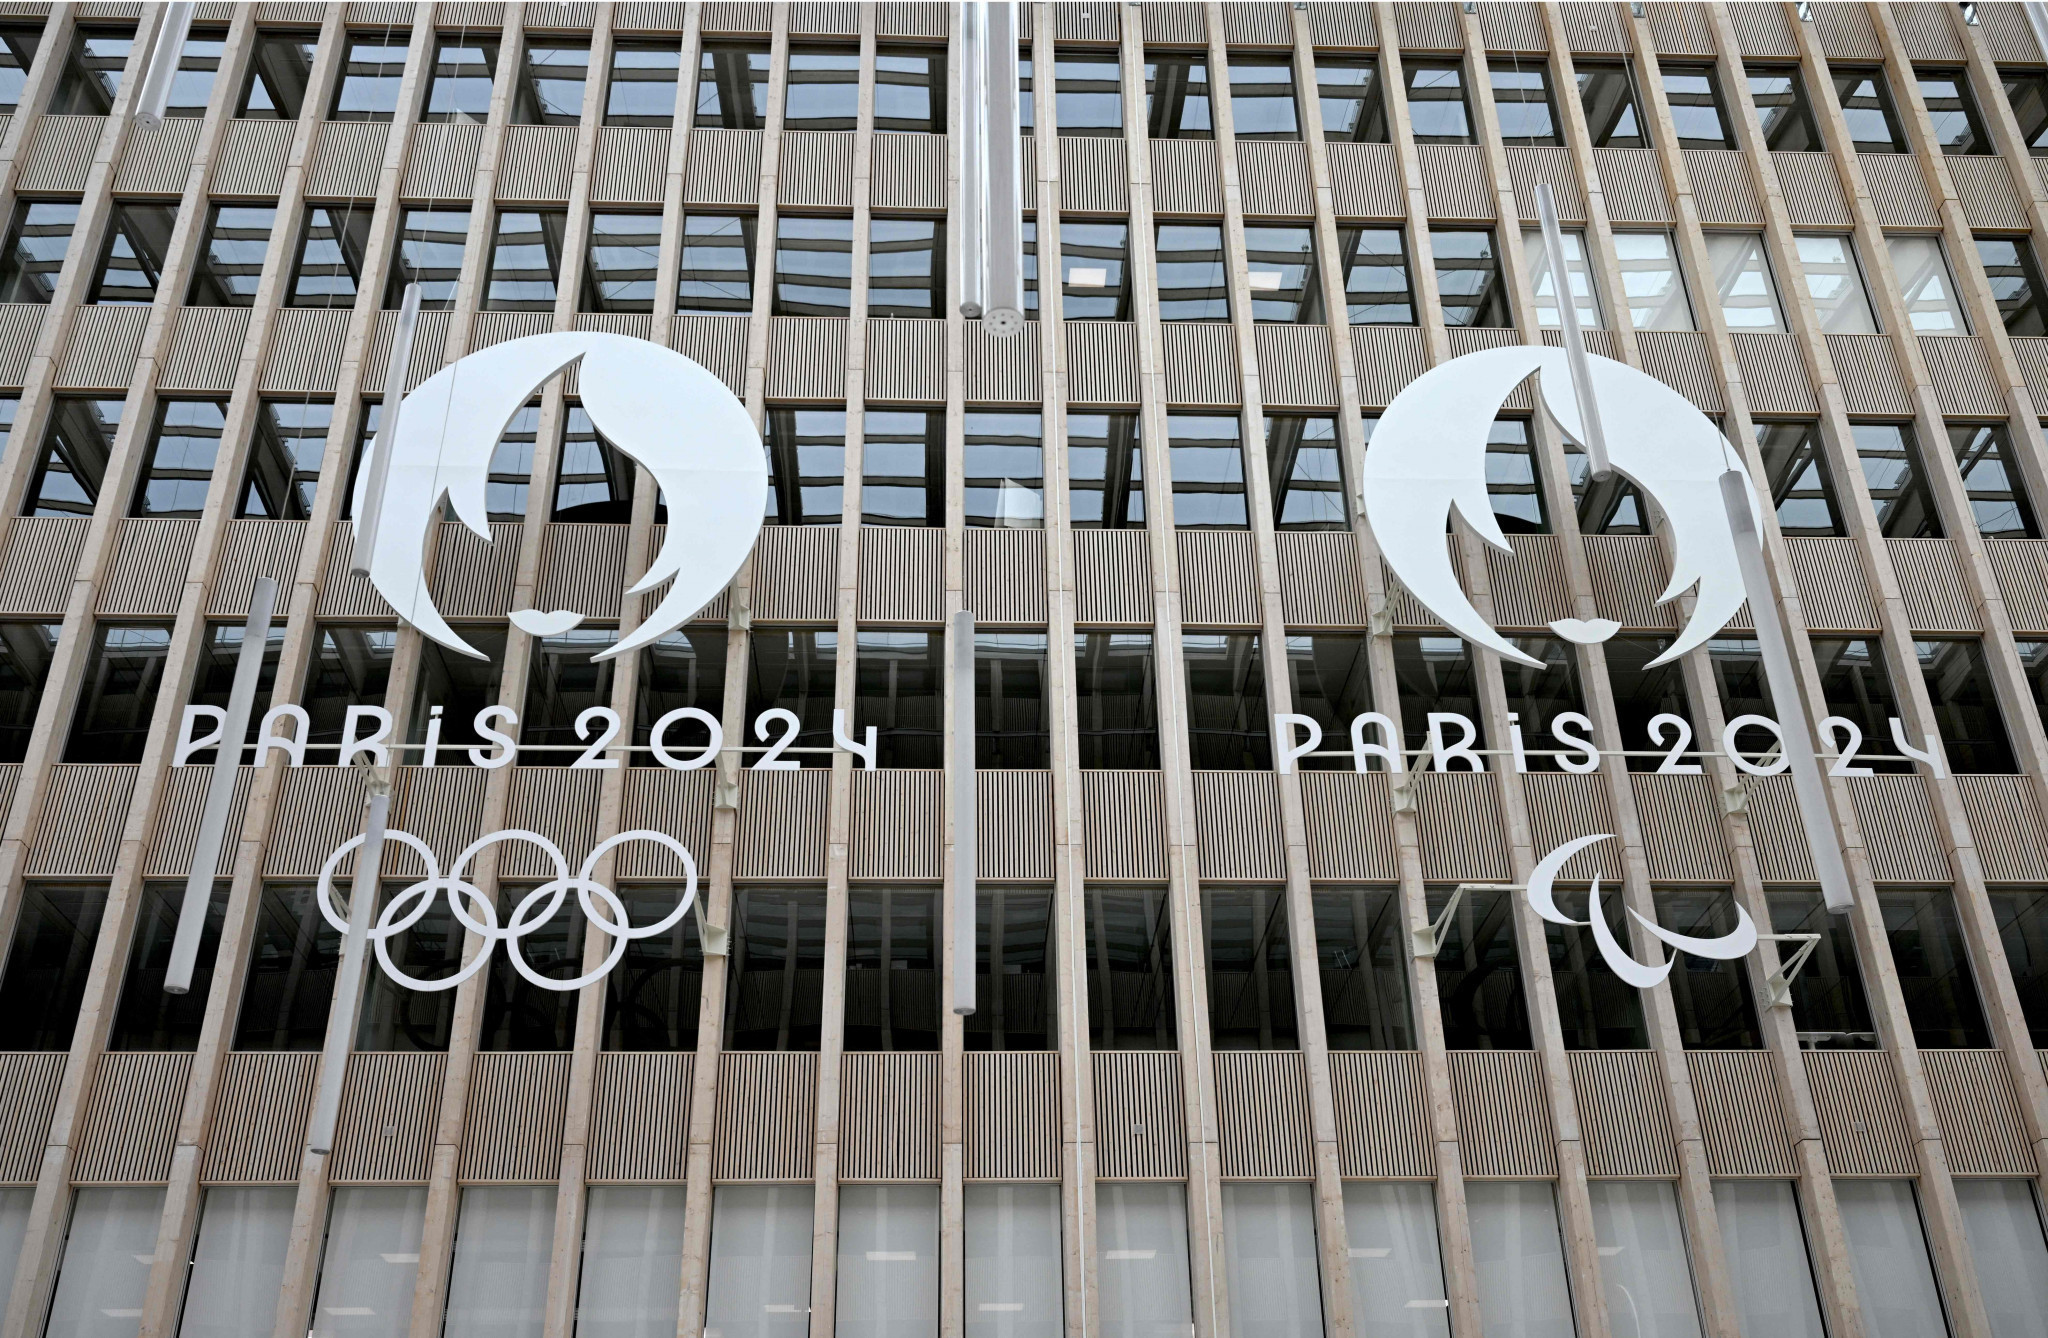 INSEP and Paris 2024 to jointly manage projects under new agreement